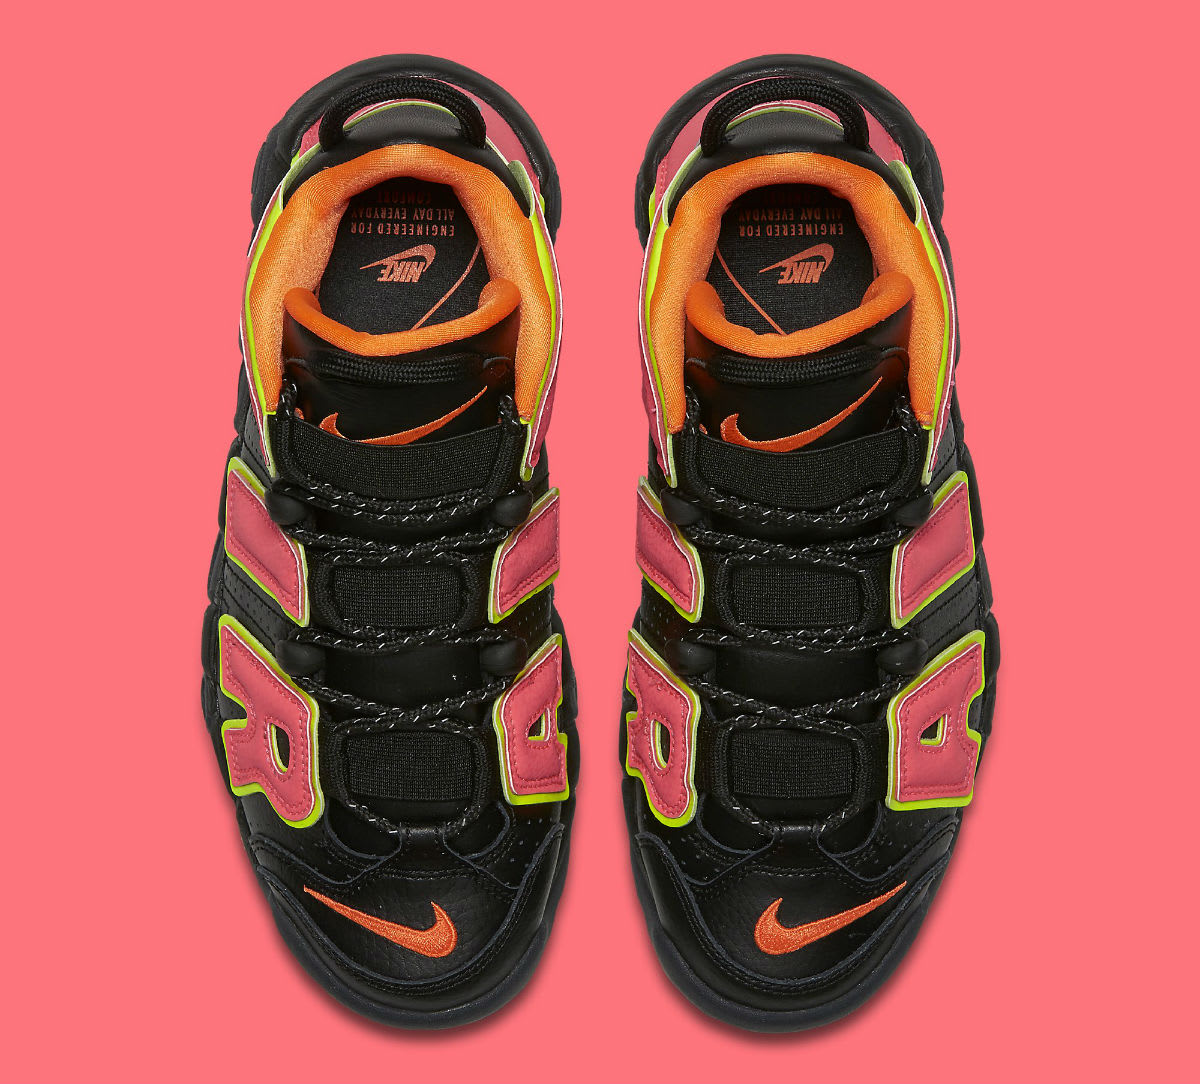 The Next Women's Colorway the Nike More Uptempo | Complex